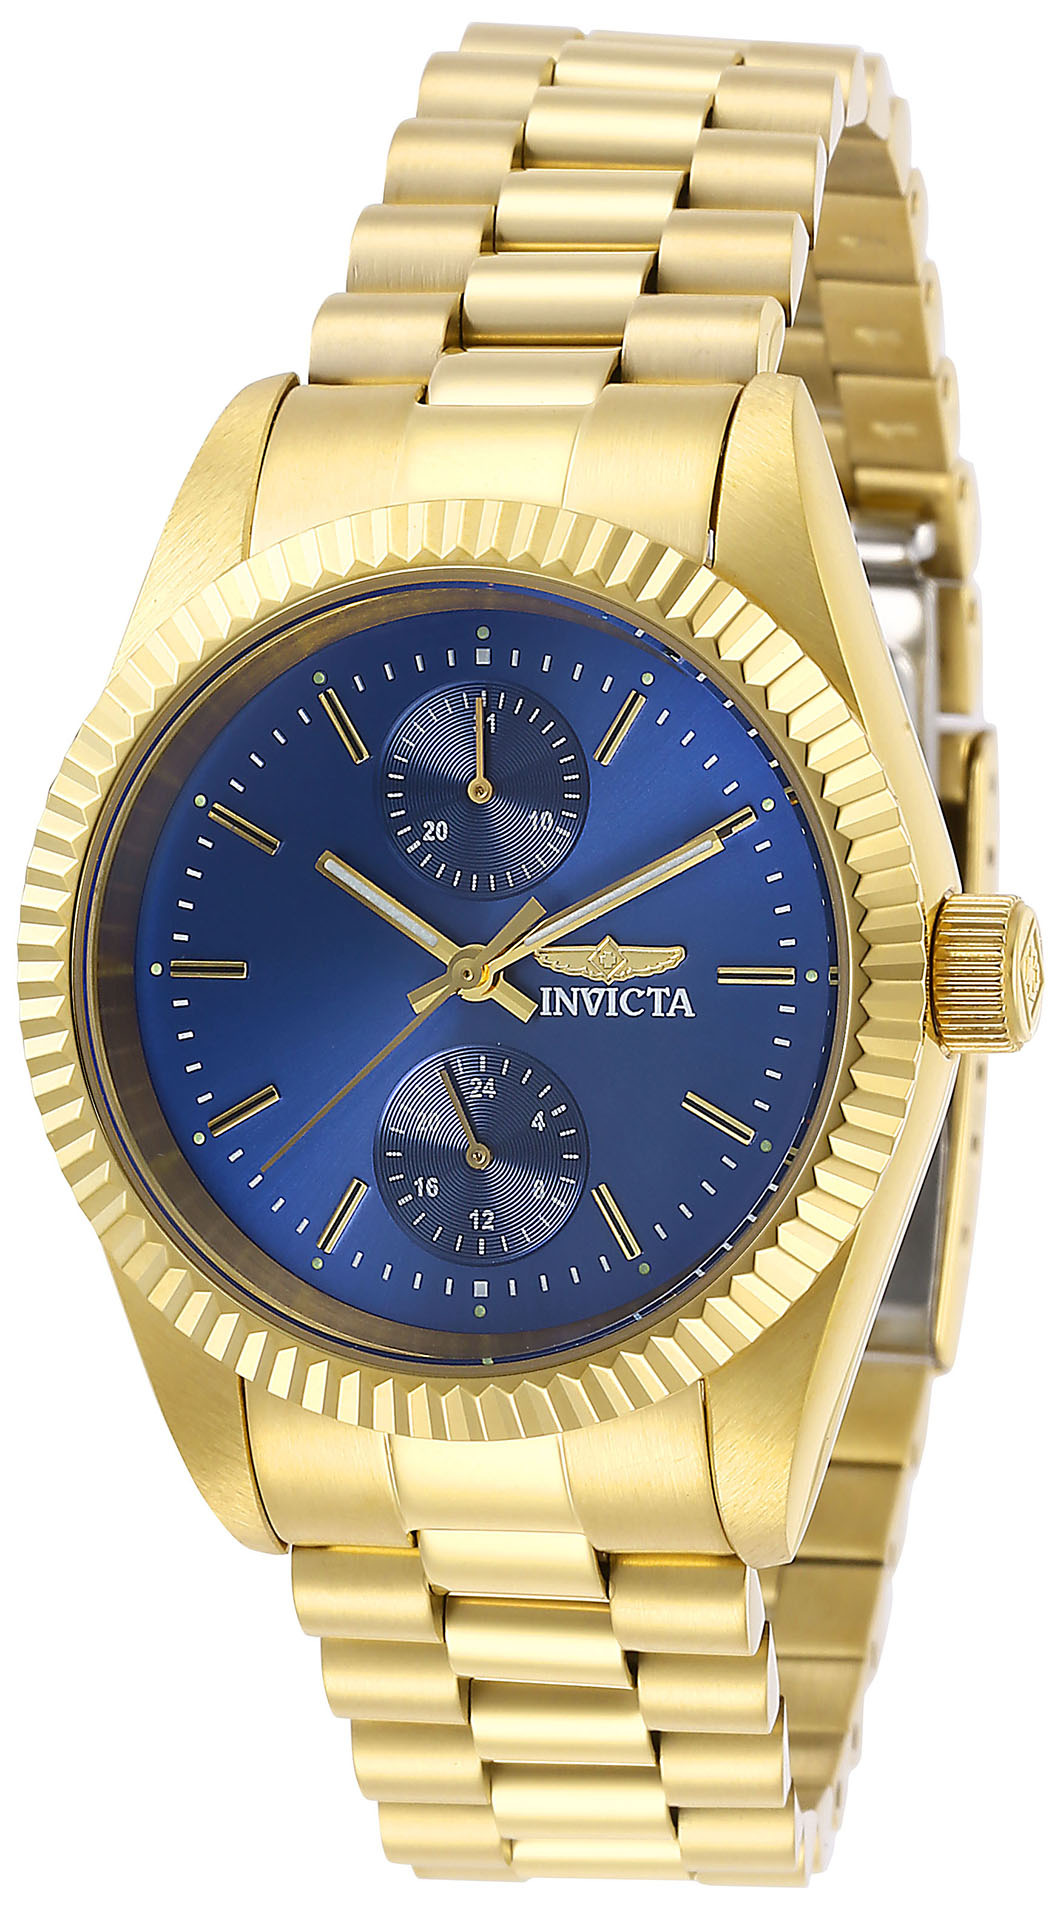 Invicta Specialty Women's Watch - 36mm, Gold (29446)